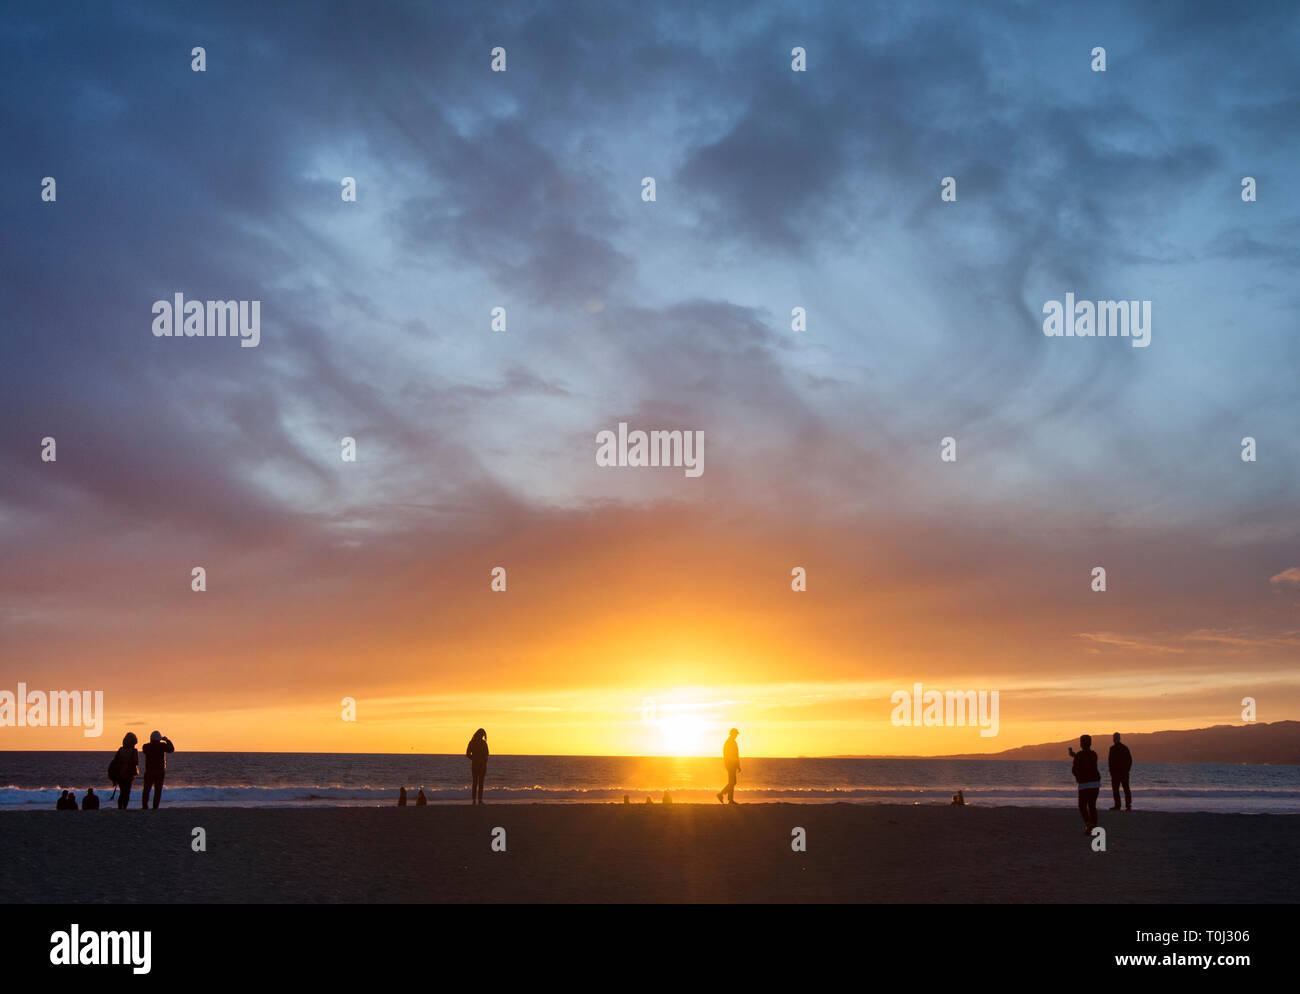 People on the beach at sunset in Santa Monica, CA Stock Photo